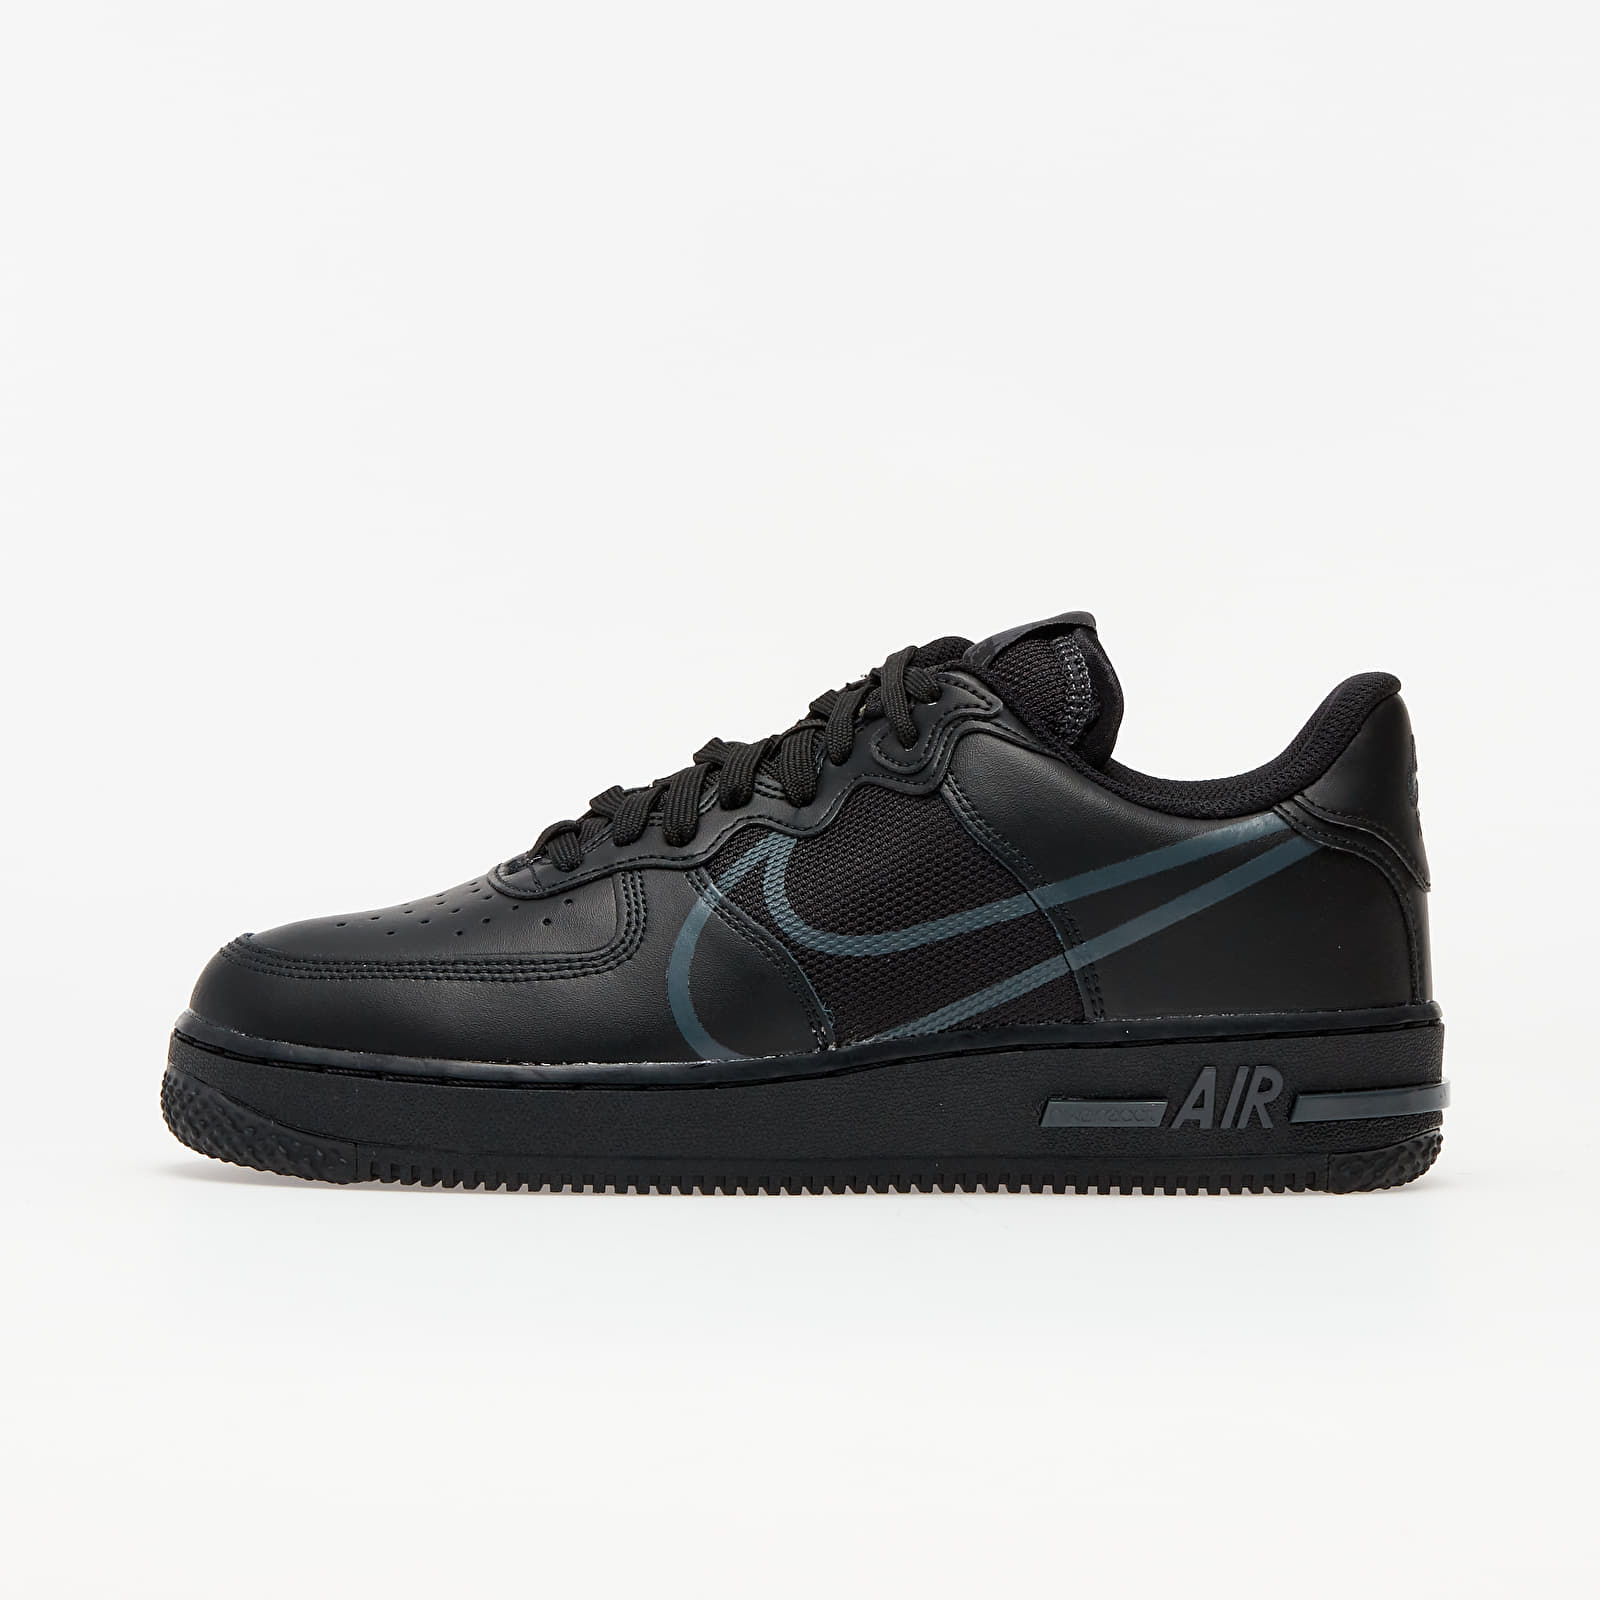 Men's shoes Nike Air Force 1 React Black/ Anthracite